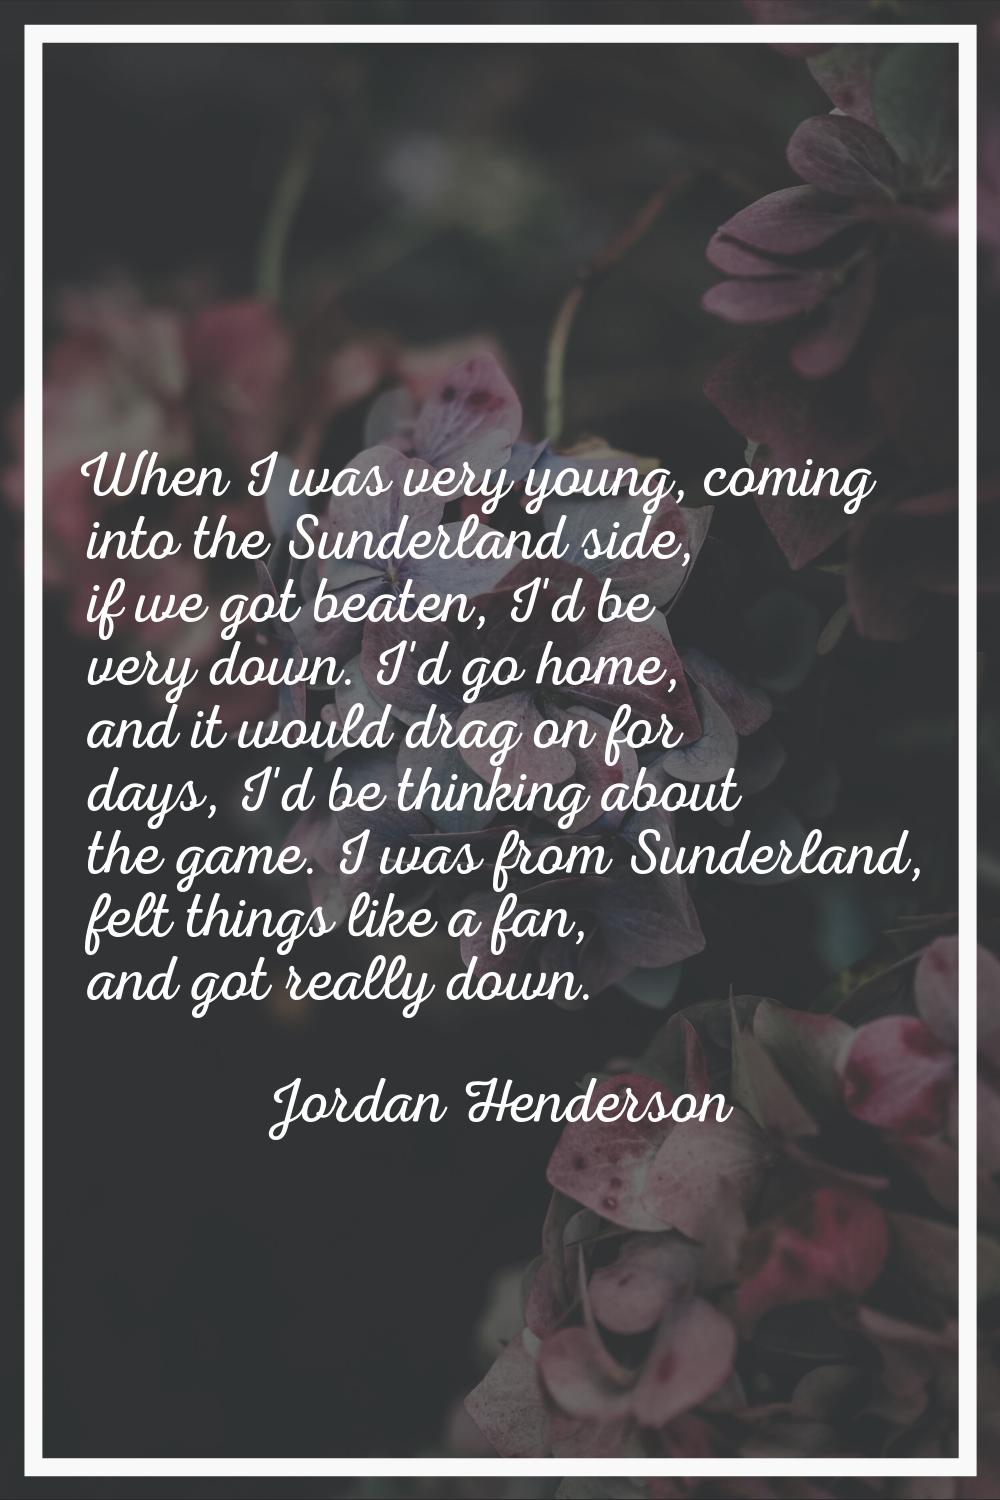 When I was very young, coming into the Sunderland side, if we got beaten, I'd be very down. I'd go 